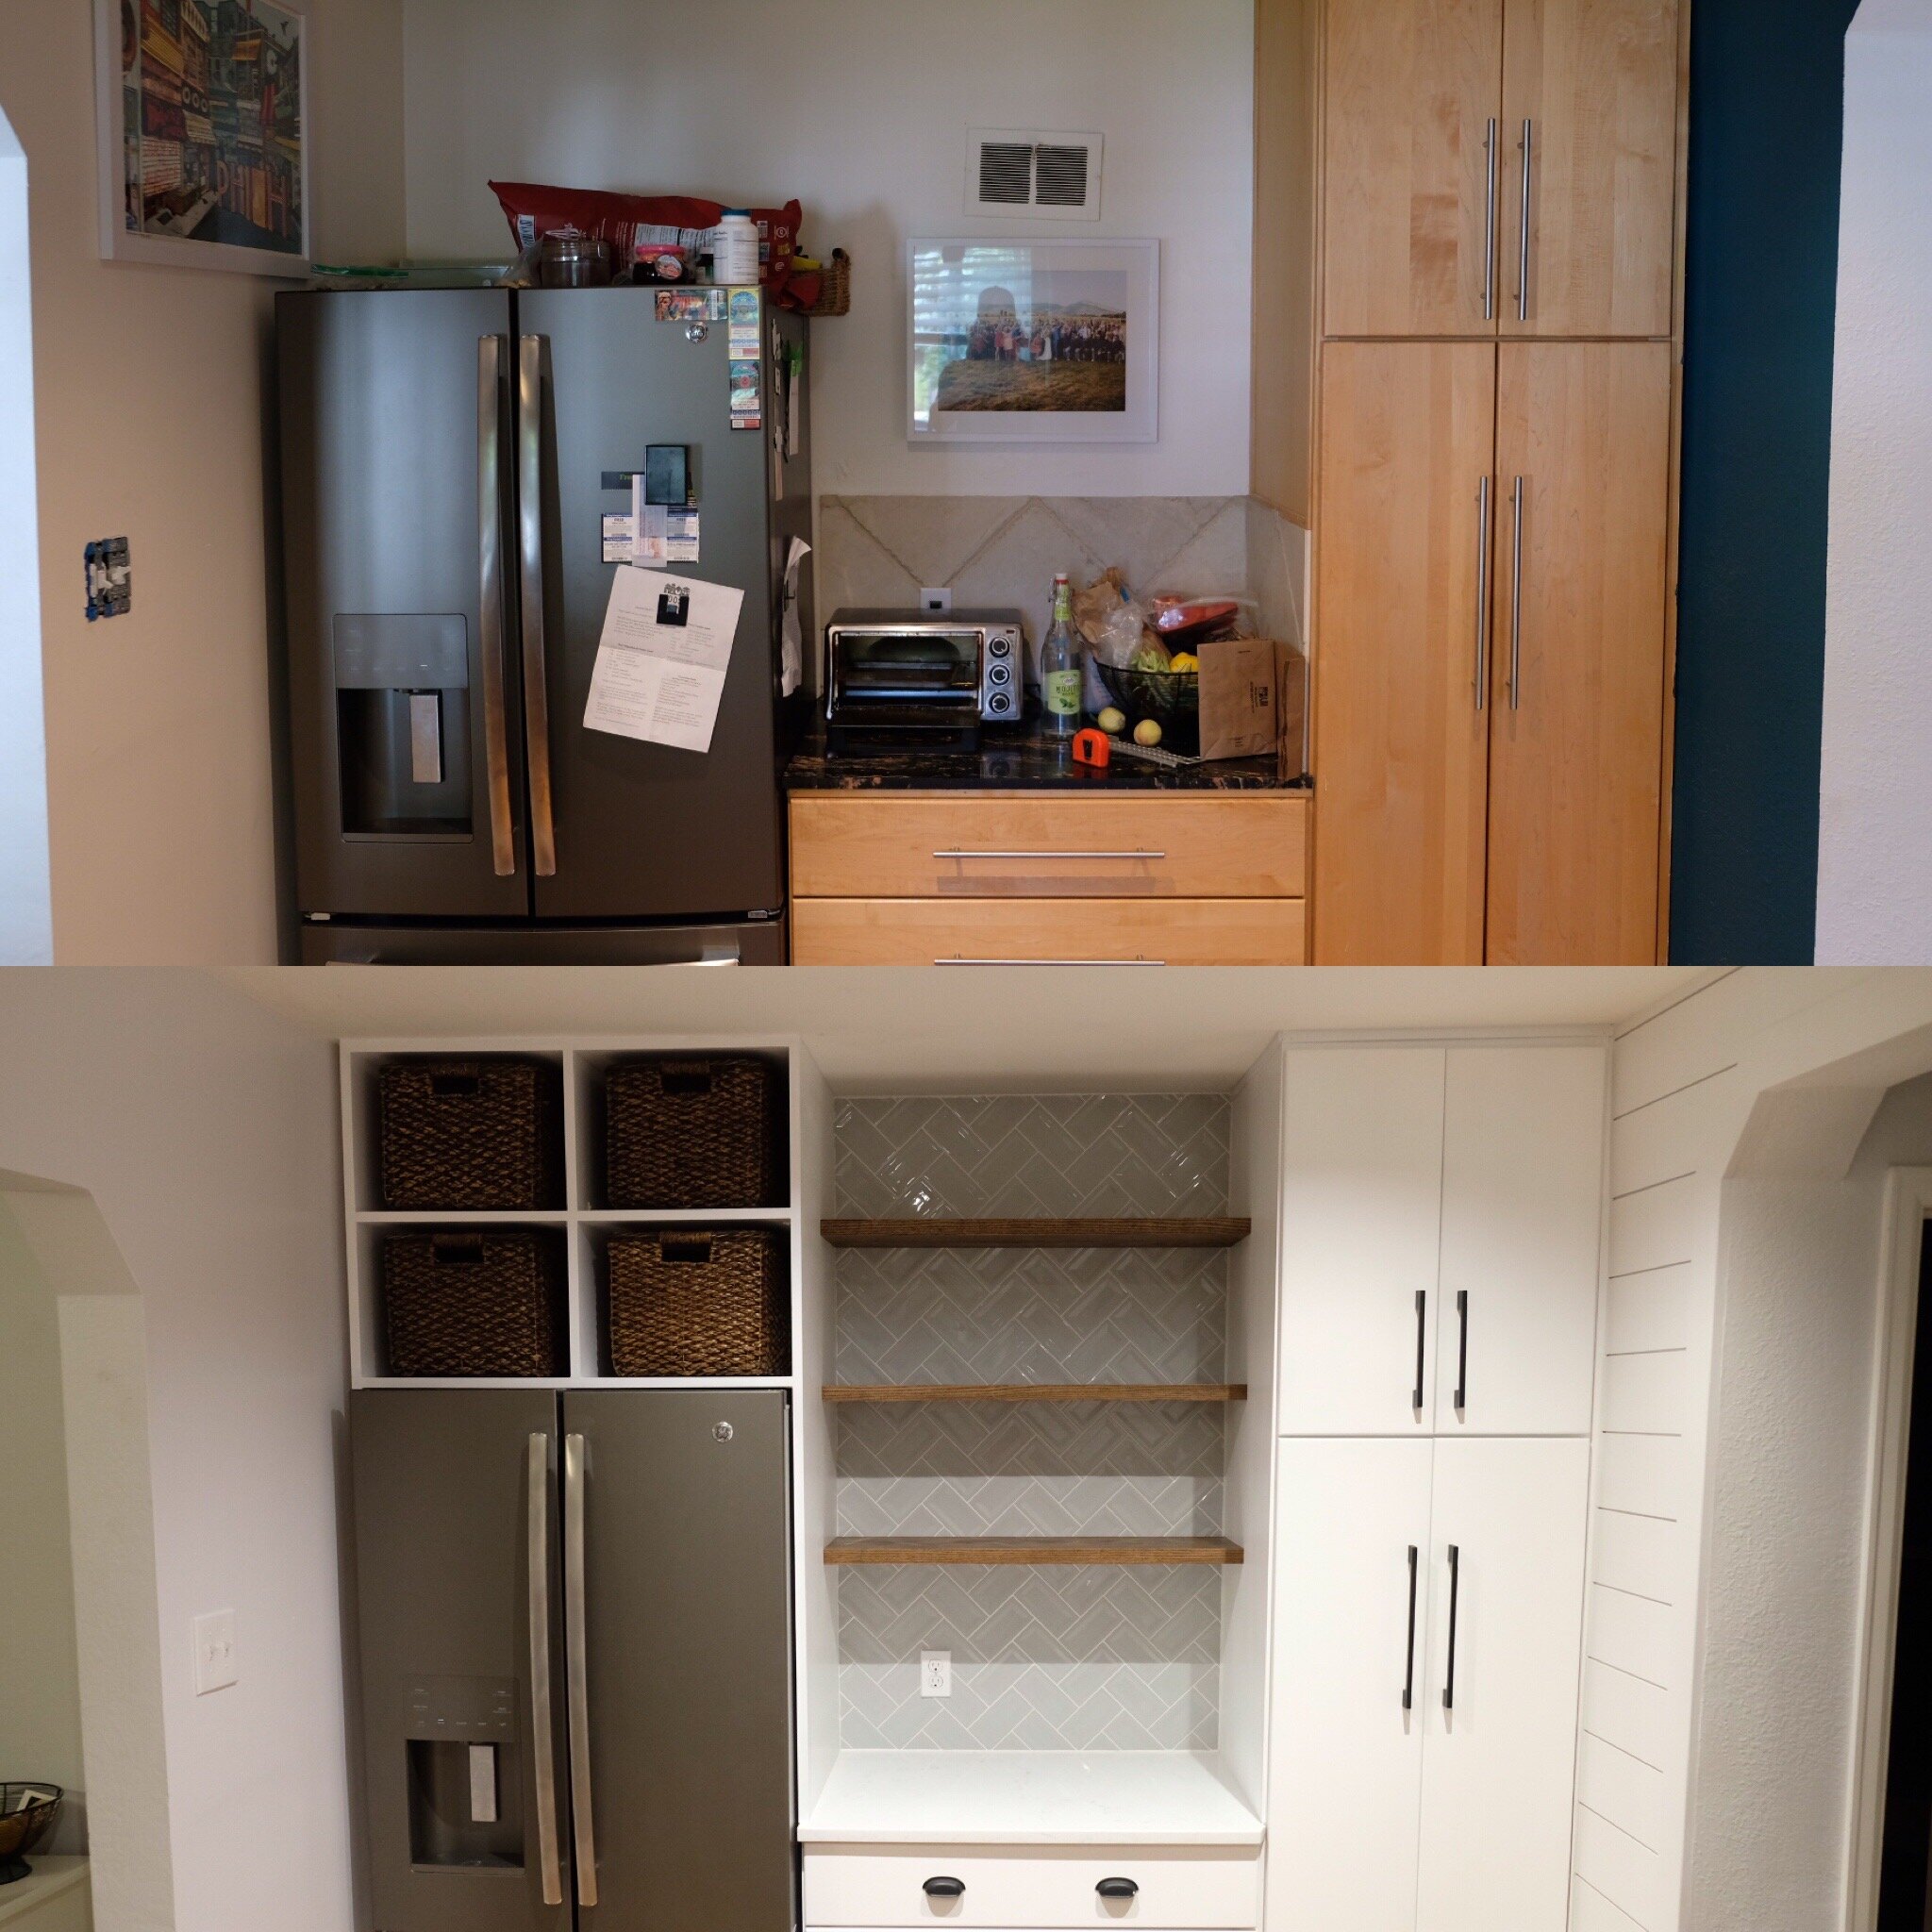  Kitchen Facelift, painted cabinets, new backsplash and countertop, shelving add 